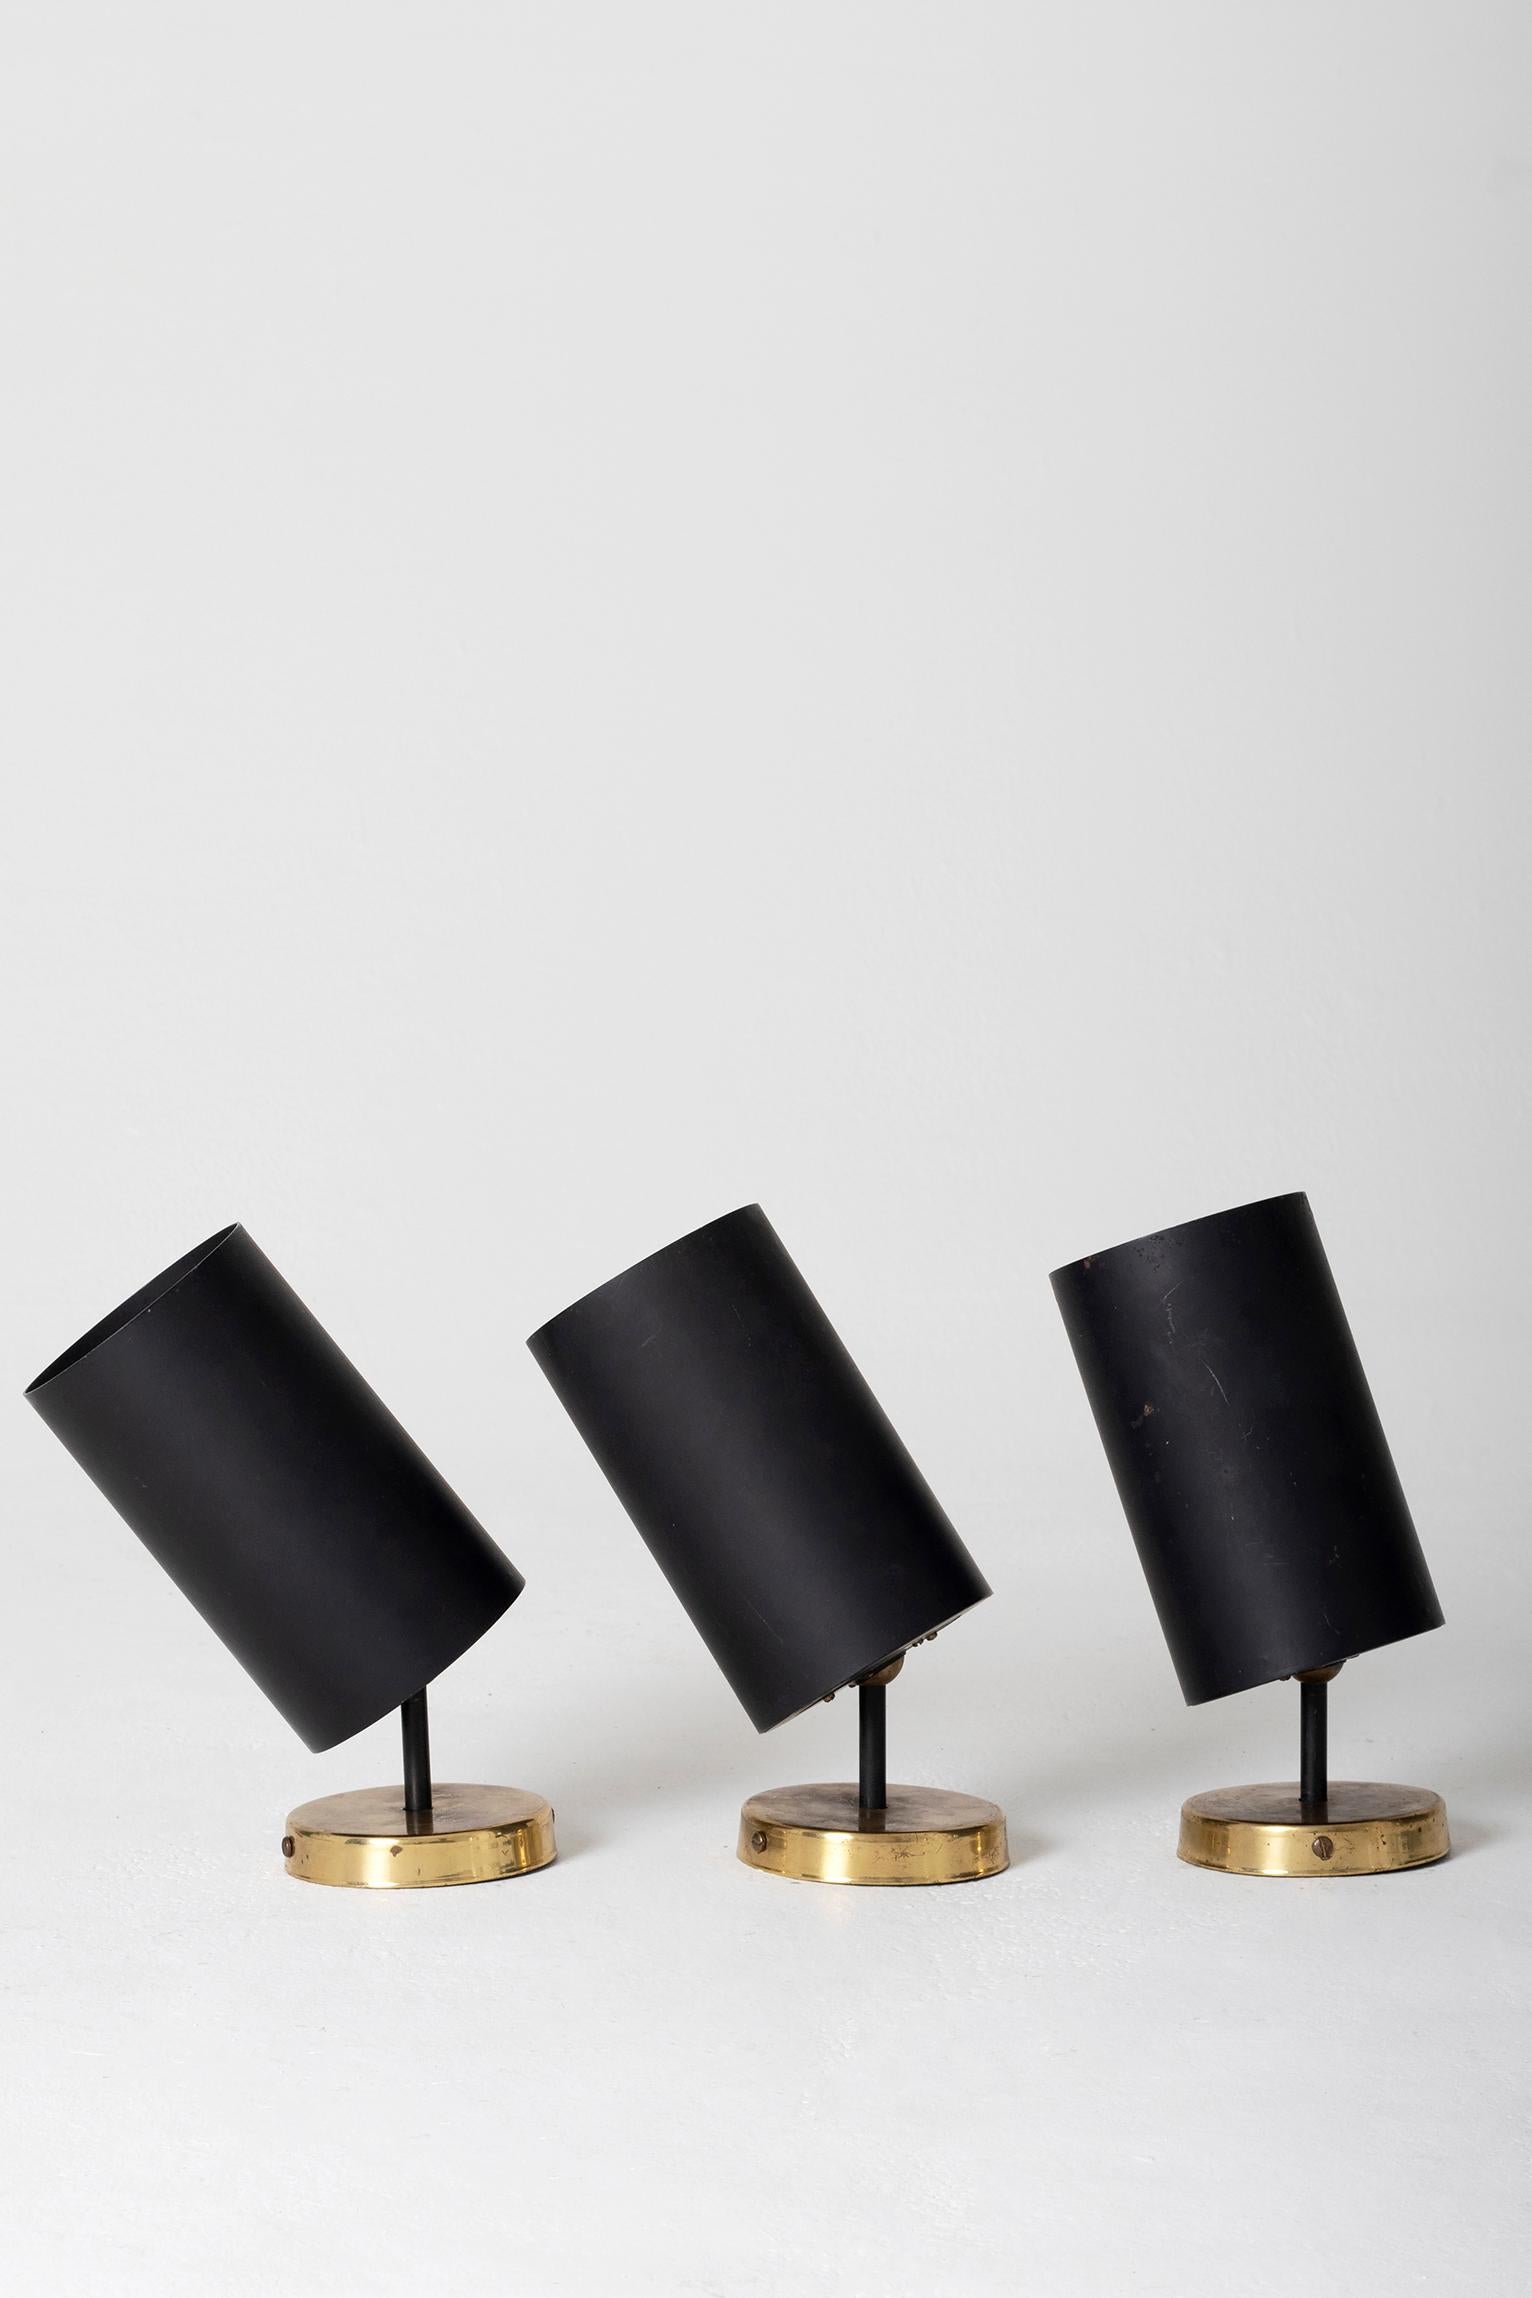 Mid-Century Modern Set of 3 Brass and Black Spot Lights 'or Wall lights' by Parscot Editions